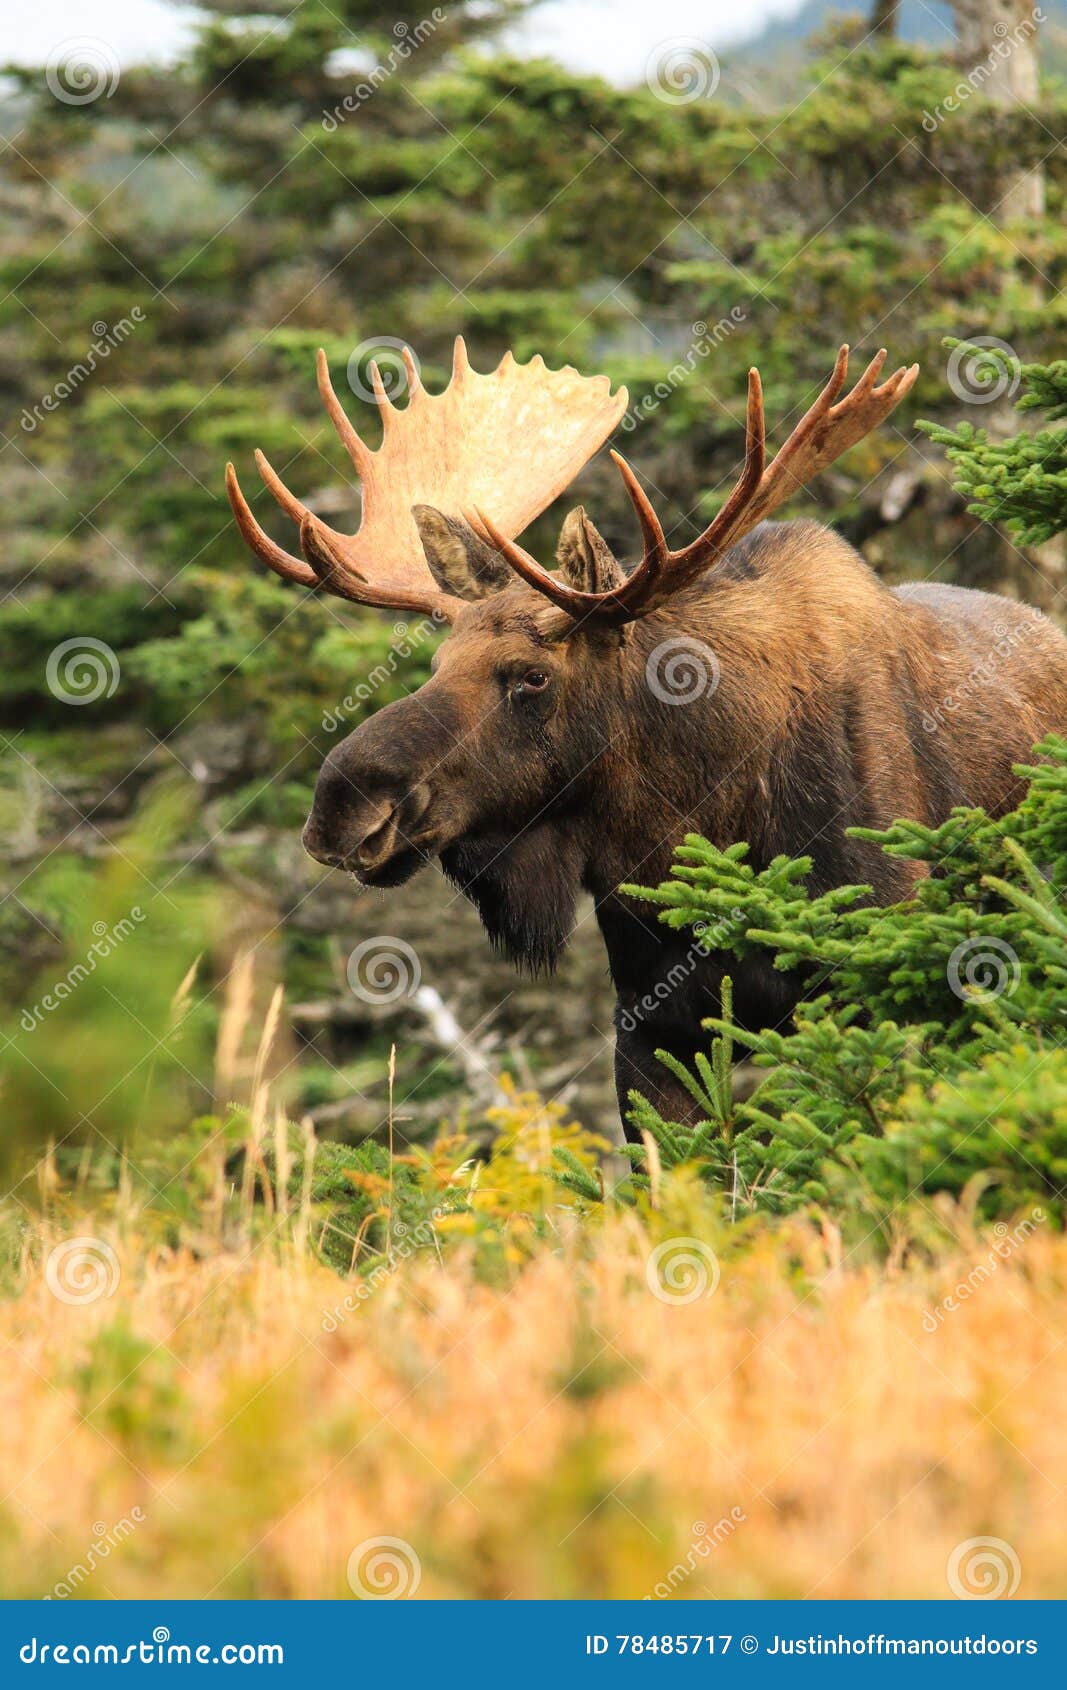 bull moose poses in forest clearing during fall rut